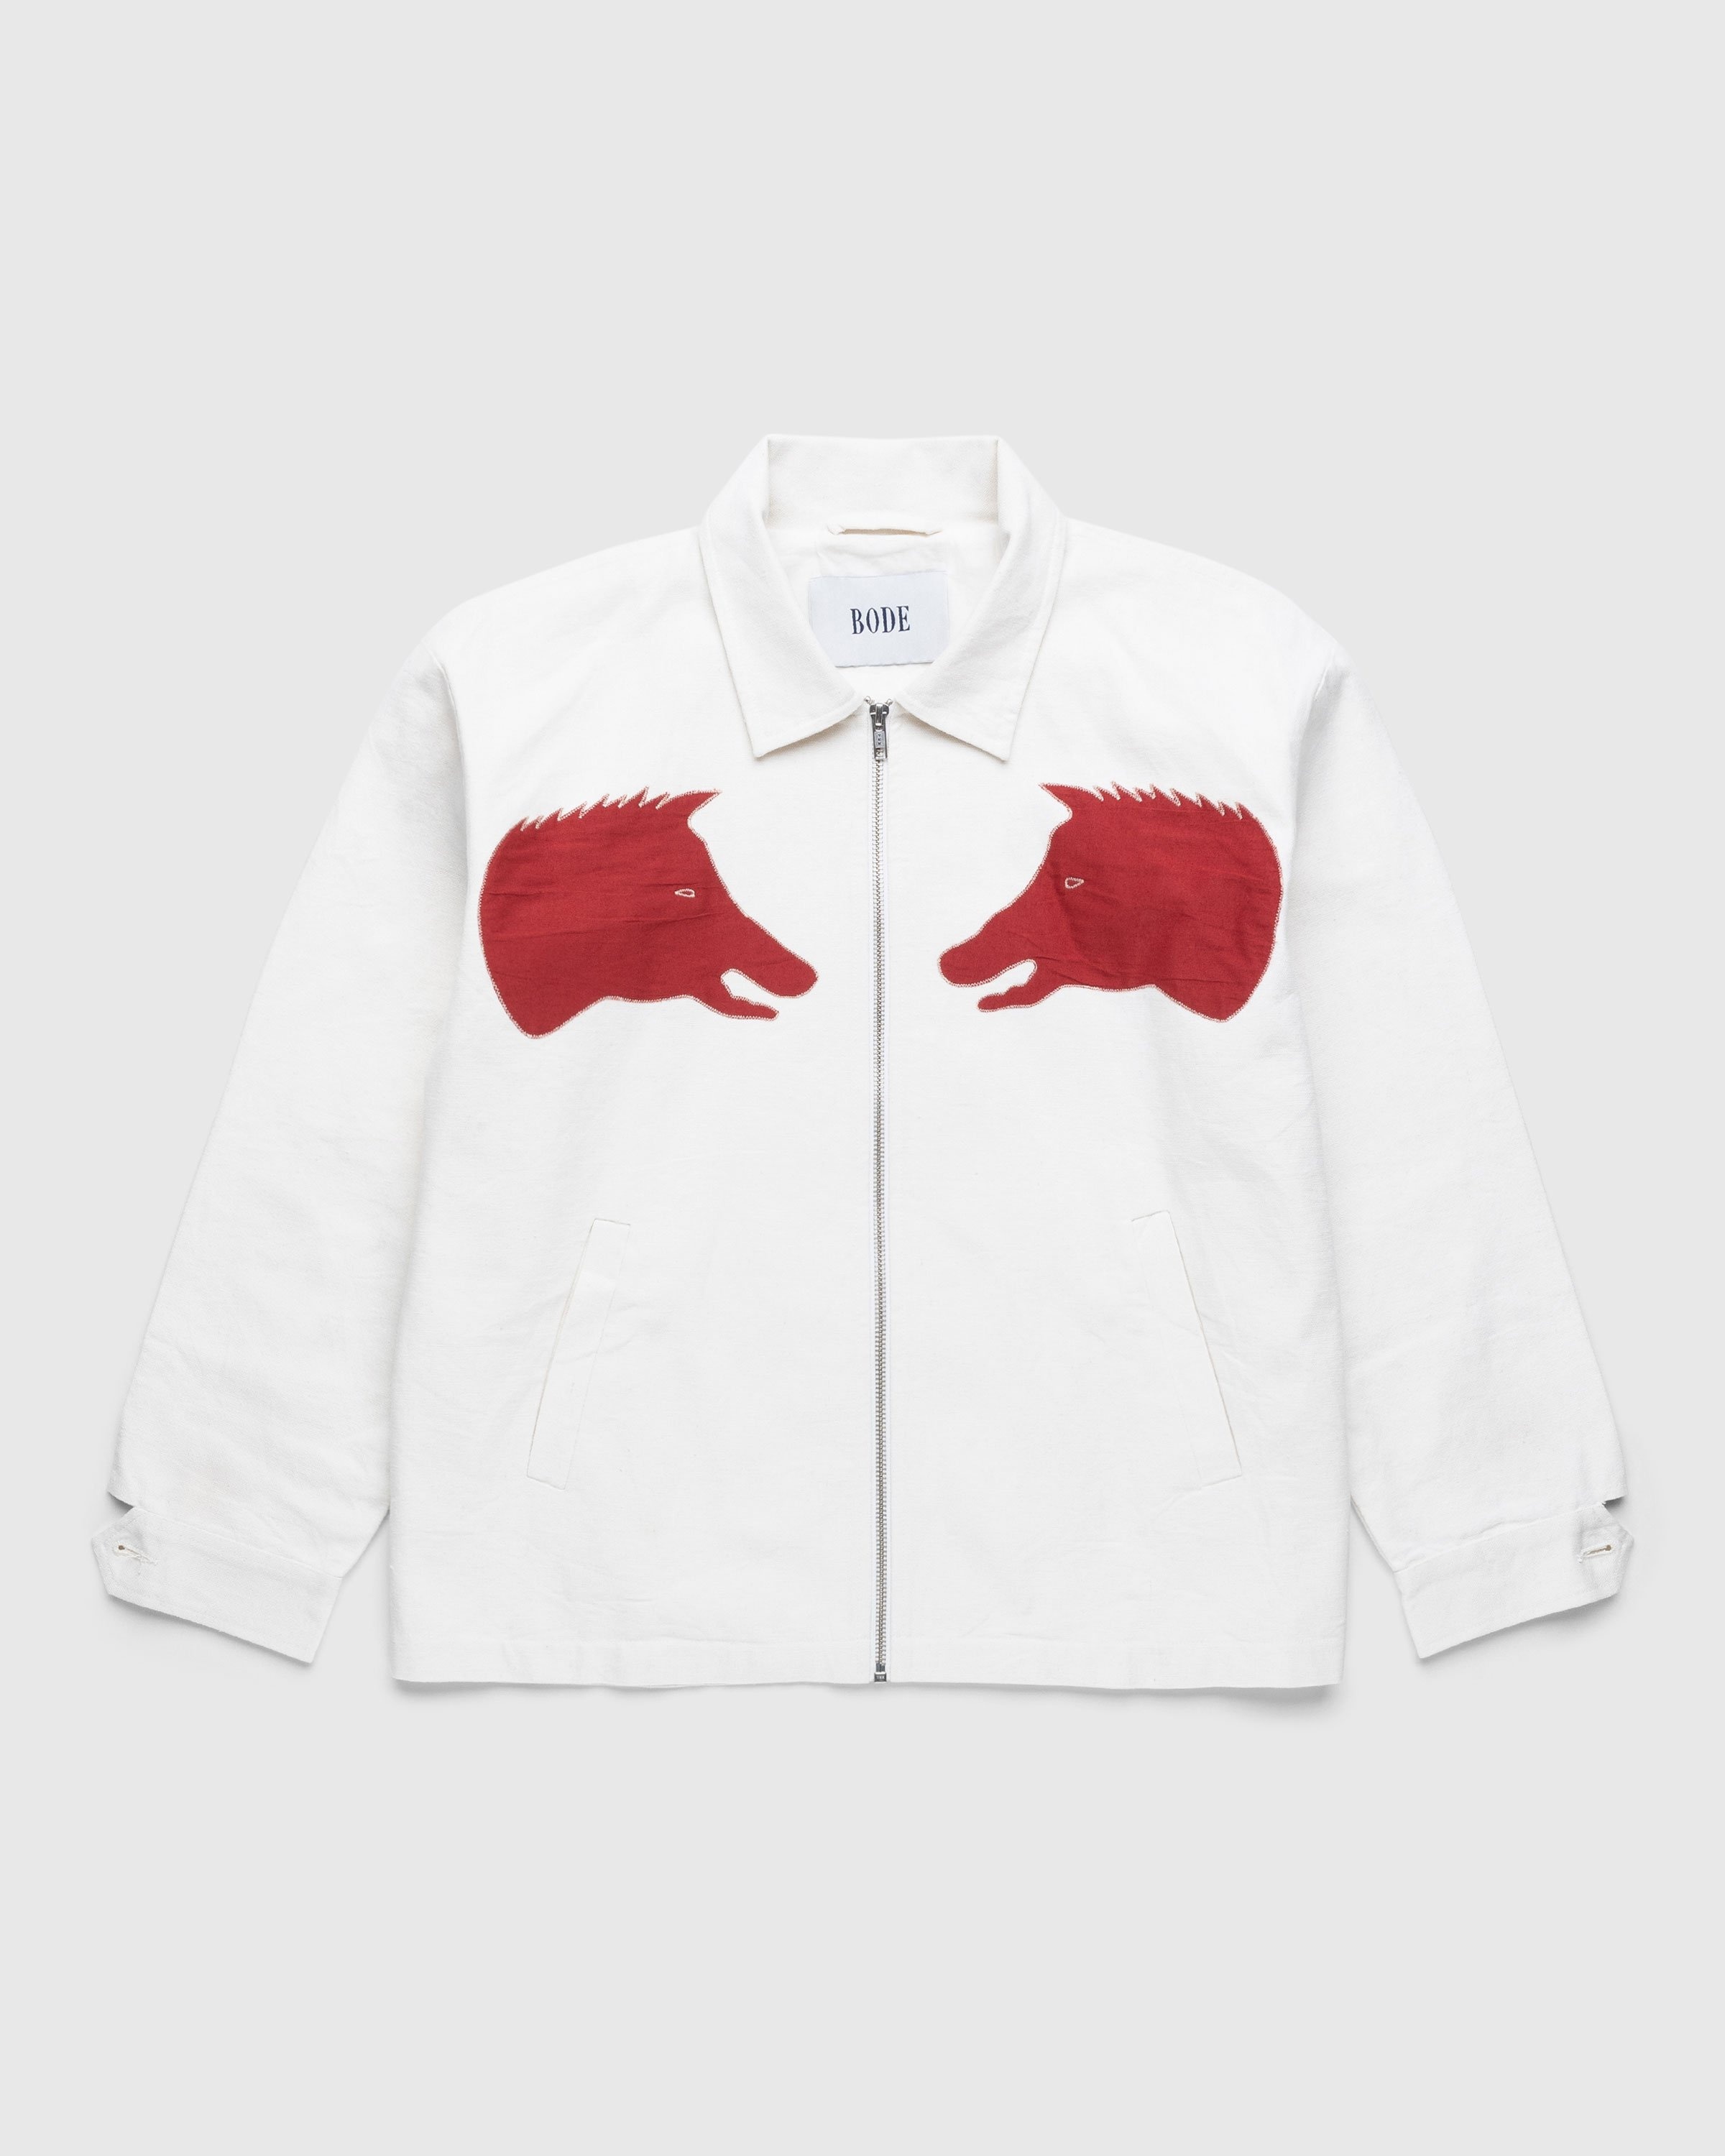 bode – Boar Applique Jacket White/Red - Outerwear - White - Image 1